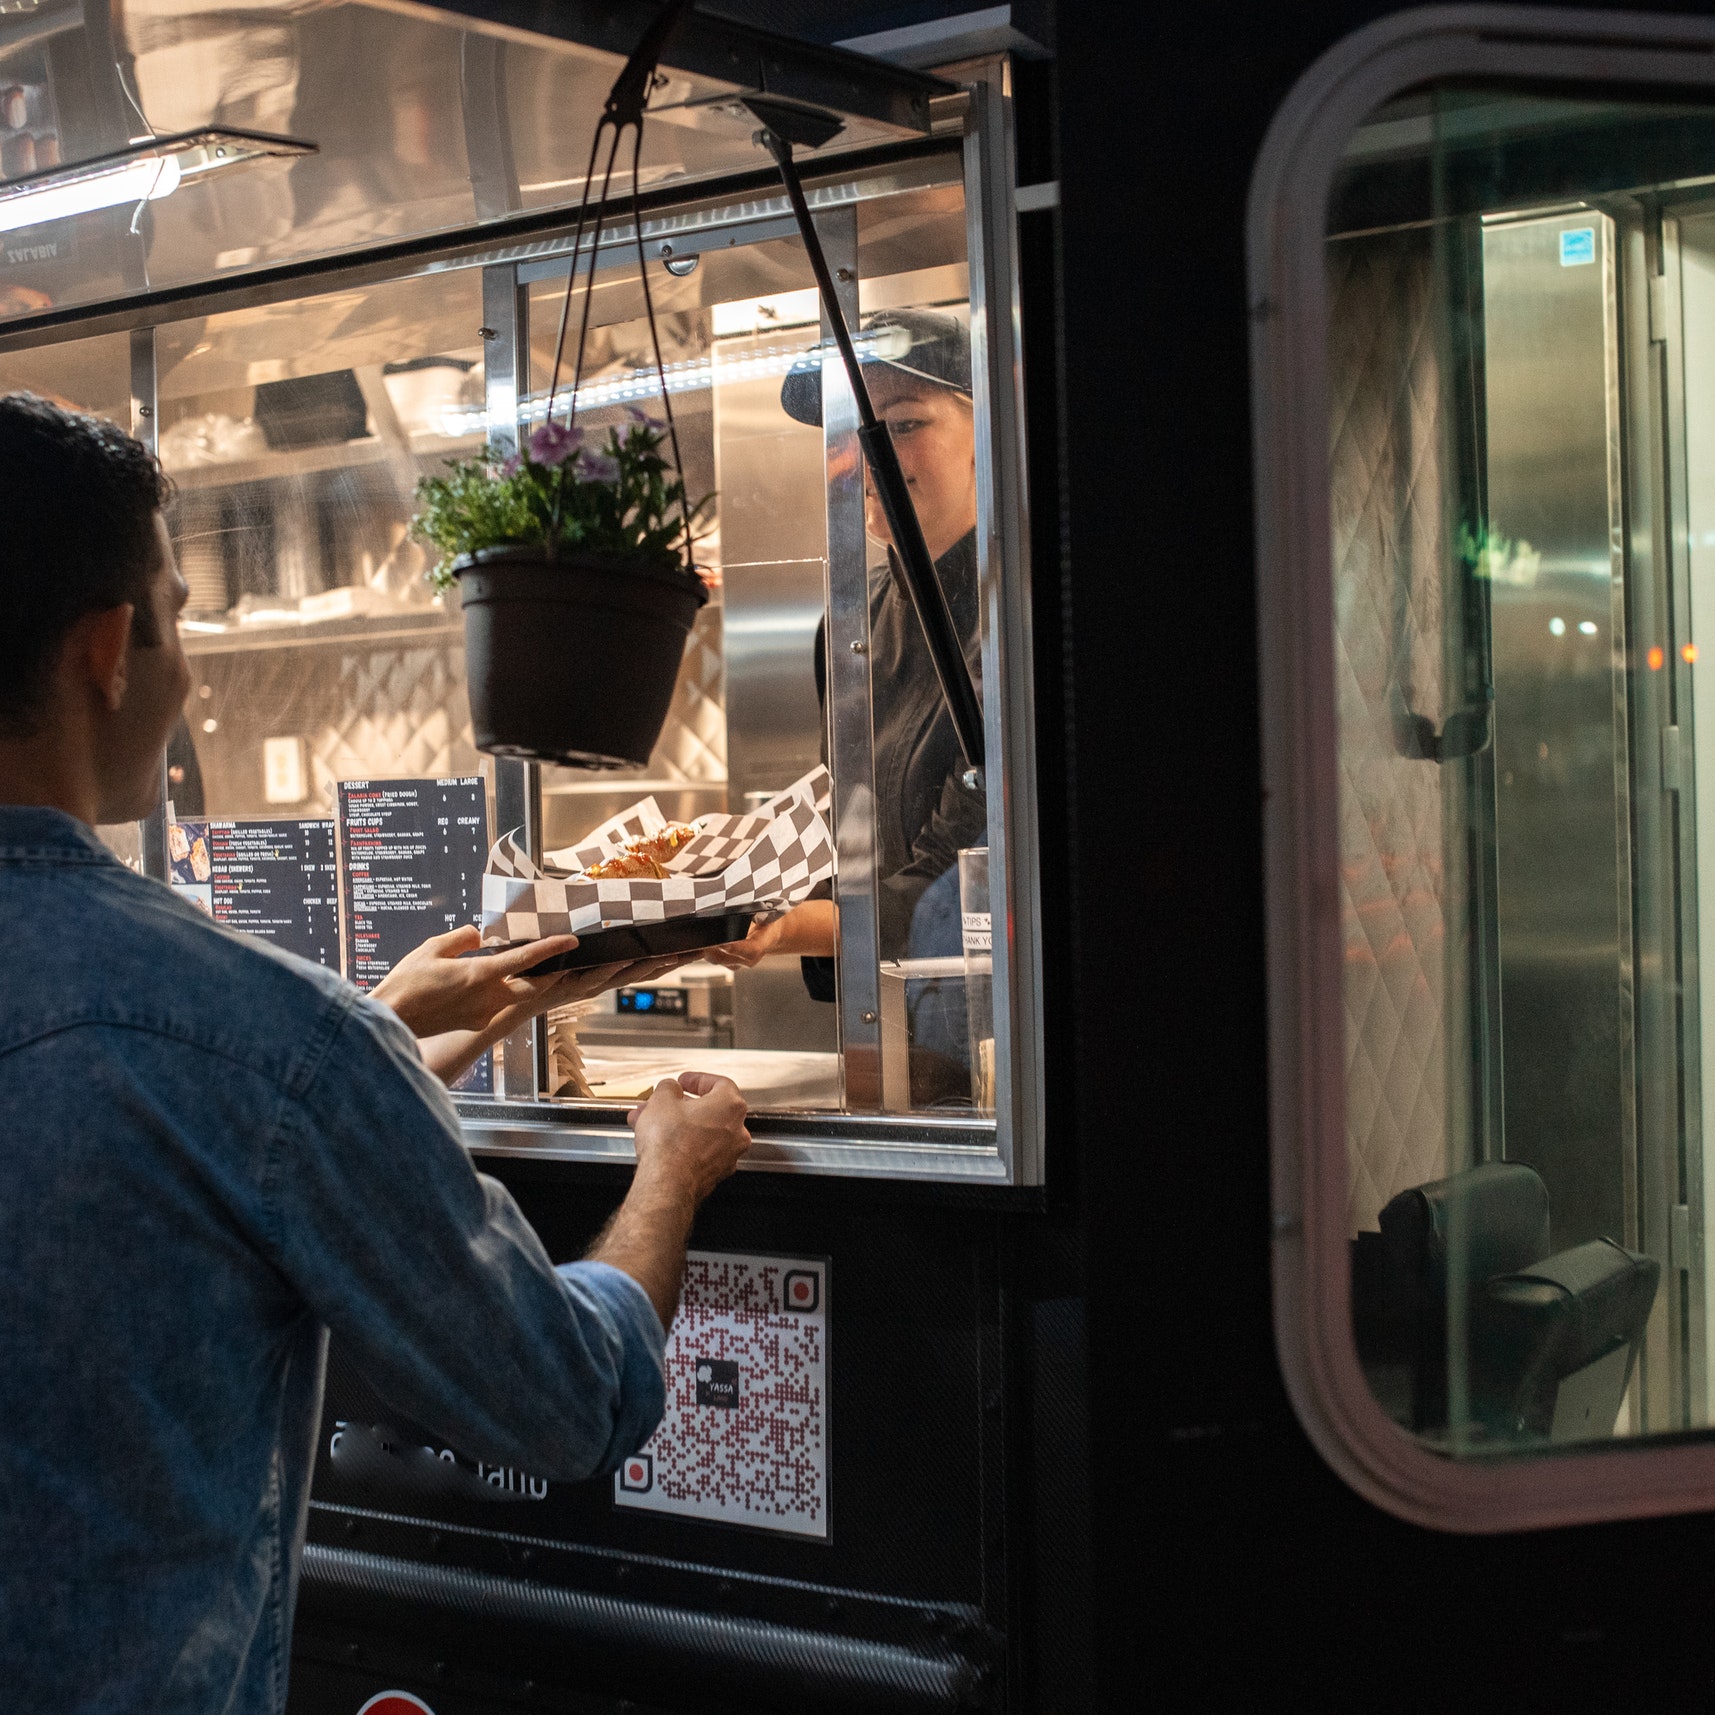 A man receives an order from a food truck window